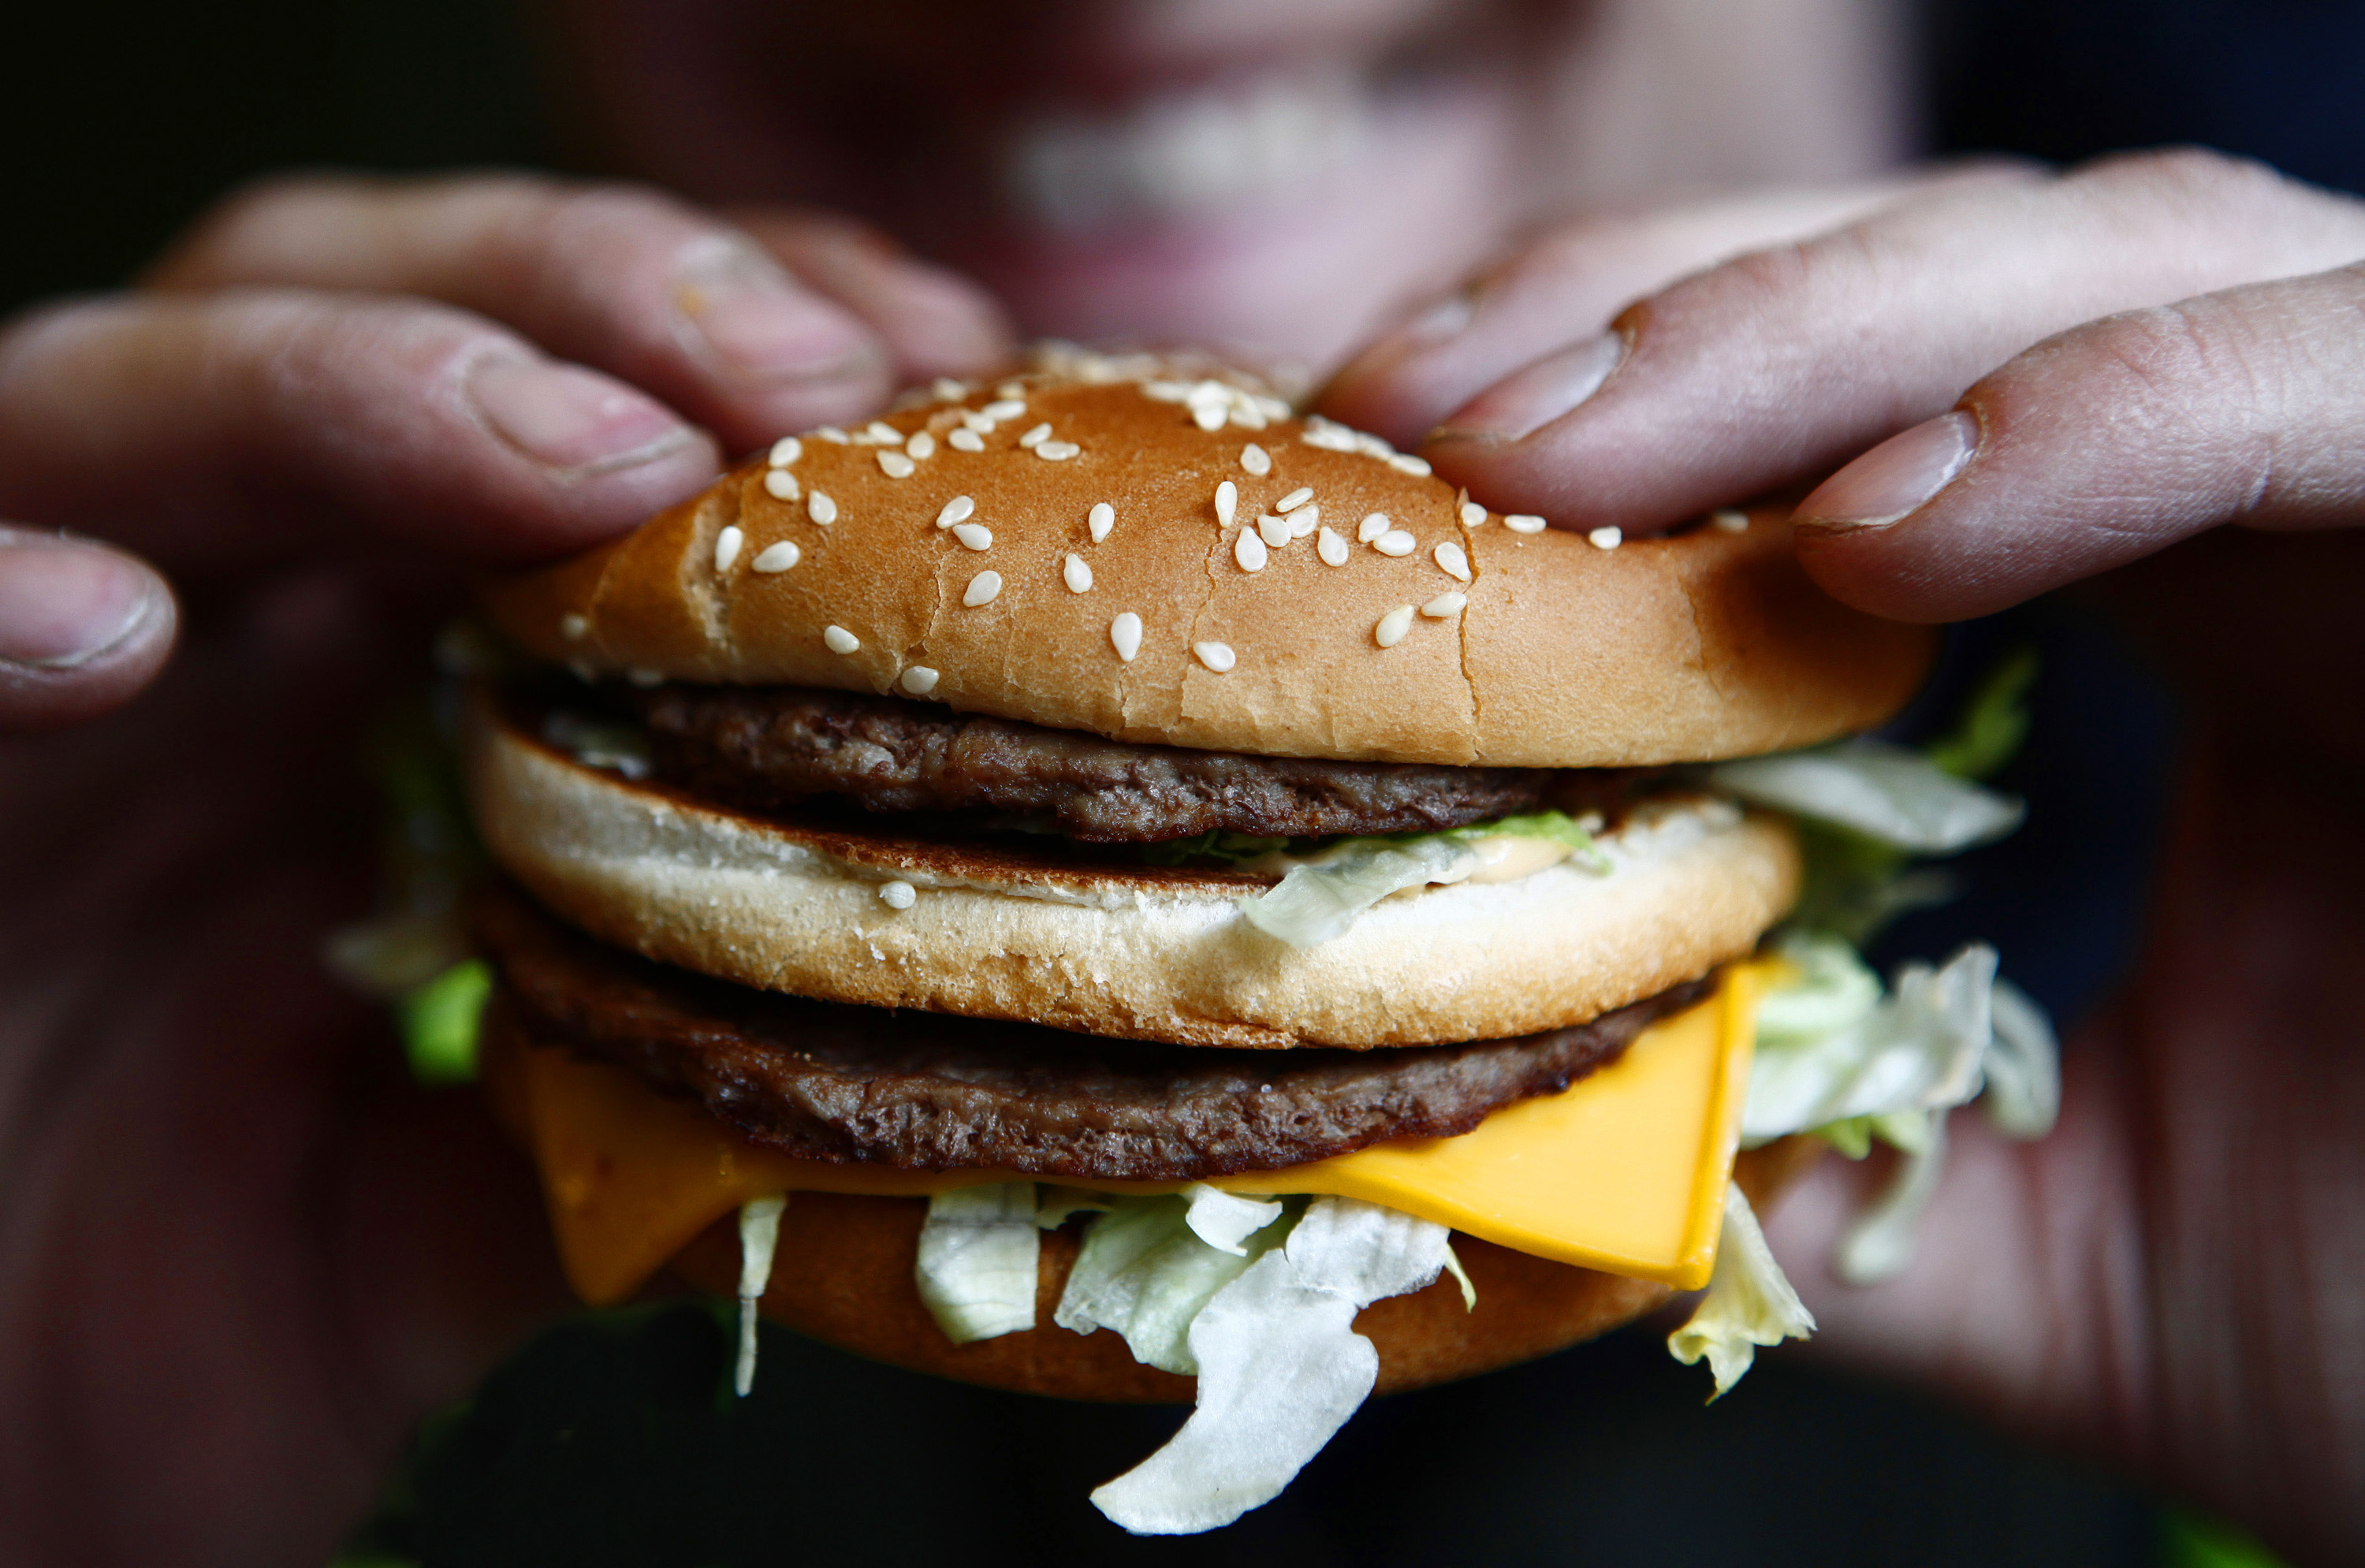 Russell Benjafield holds his Big Mac burger at a McDonald's restaurant in London, U.K., on Monday, Feb. 1, 2010. (Jason Alden—Bloomberg / Getty Images)